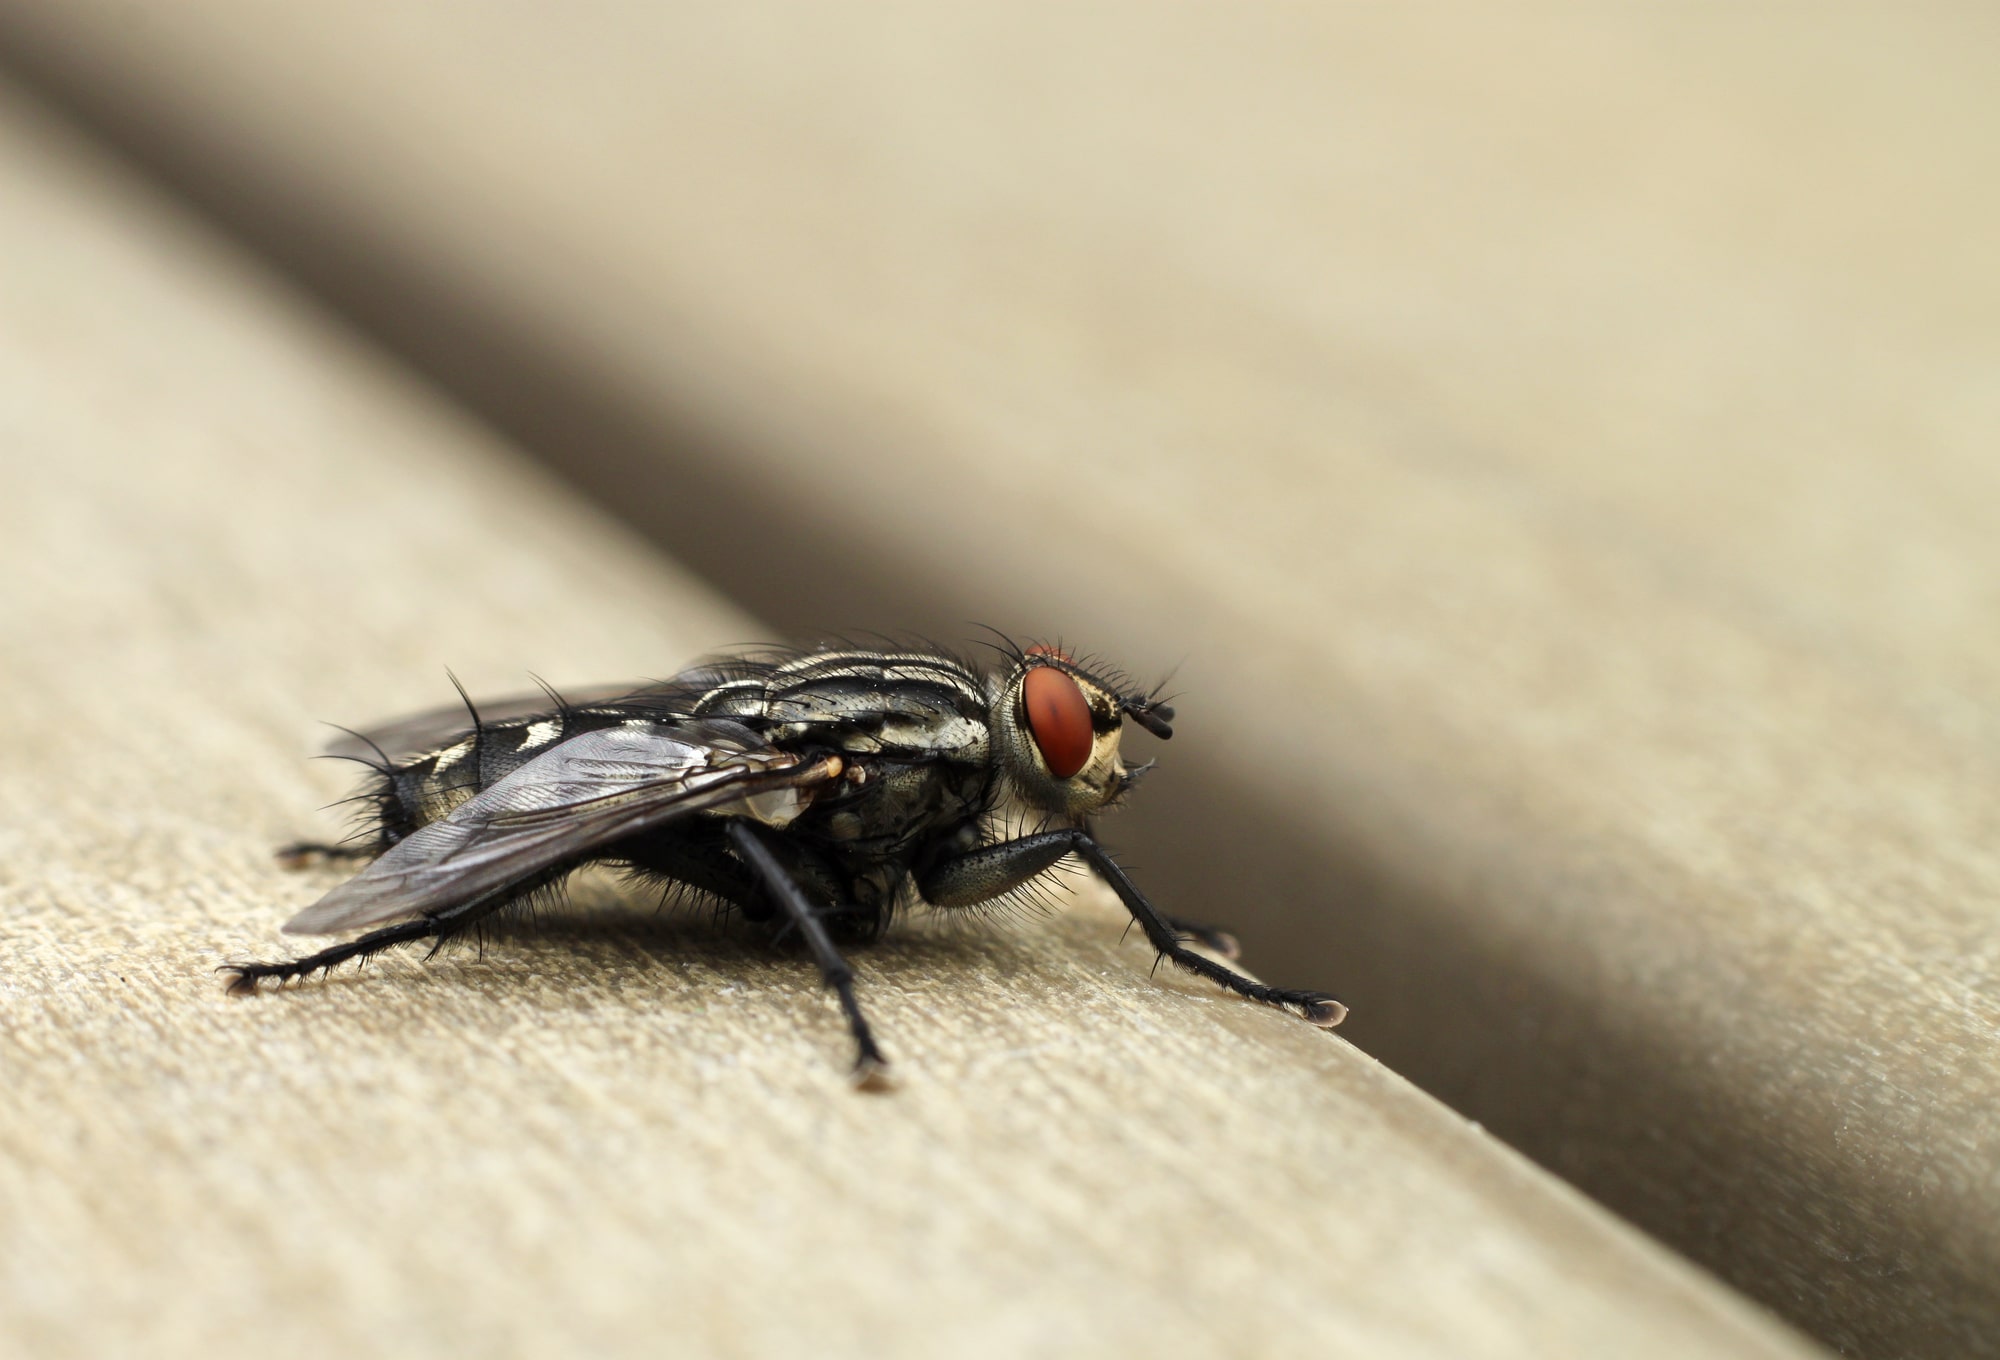 What are cluster flies and how do you get rid of a cluster fly infestation?